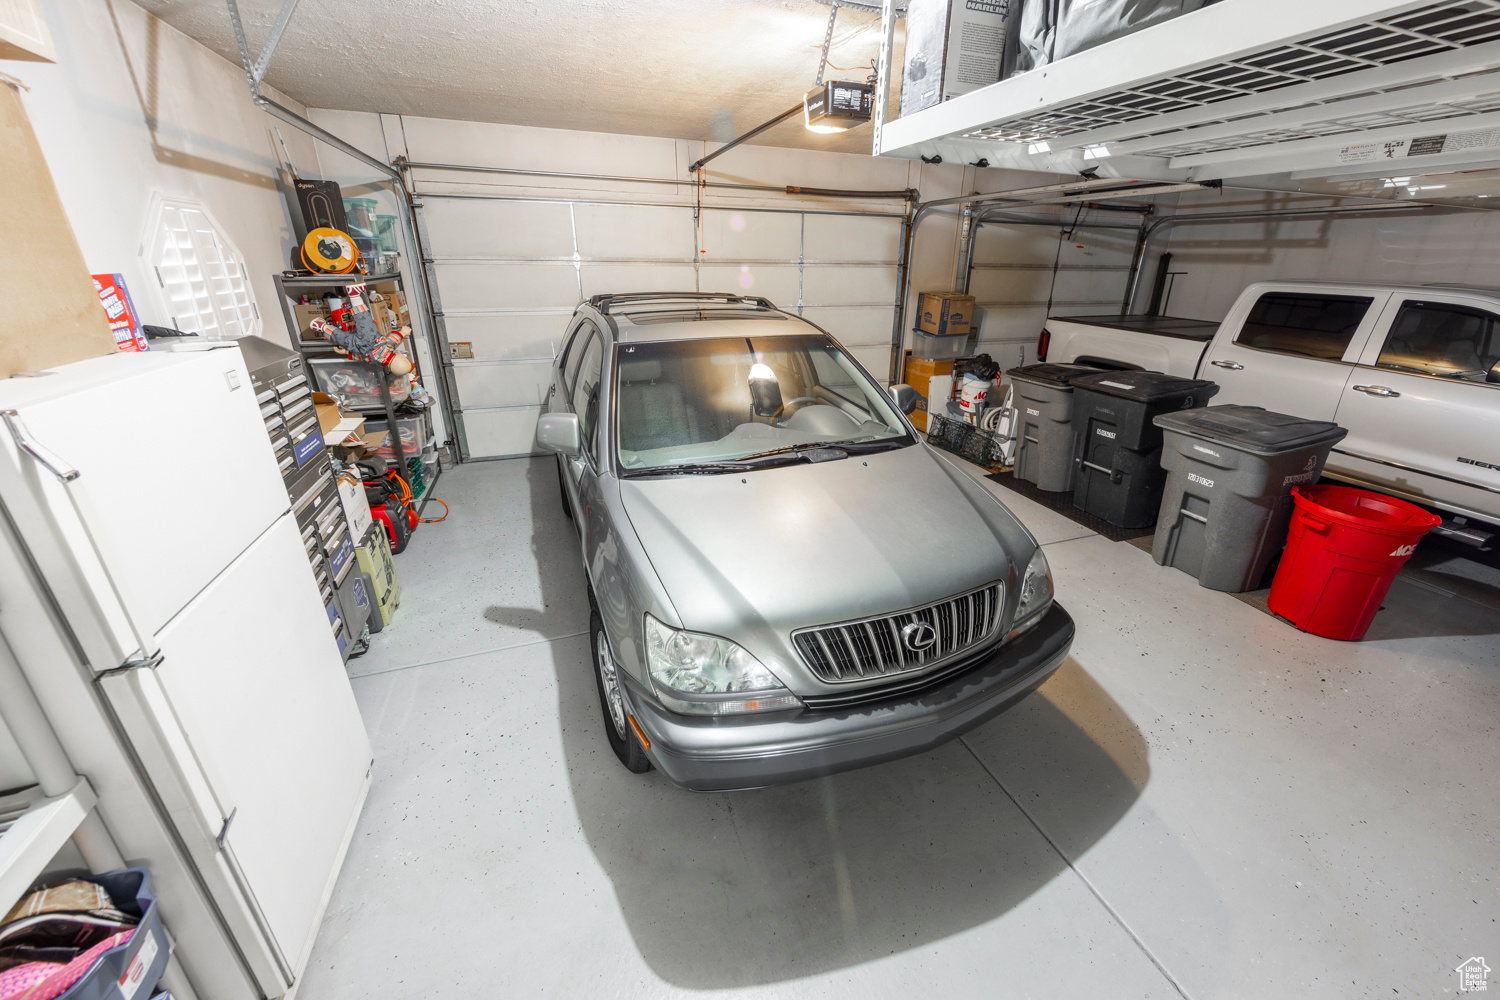 View of garage area (this refrigerator is excluded)